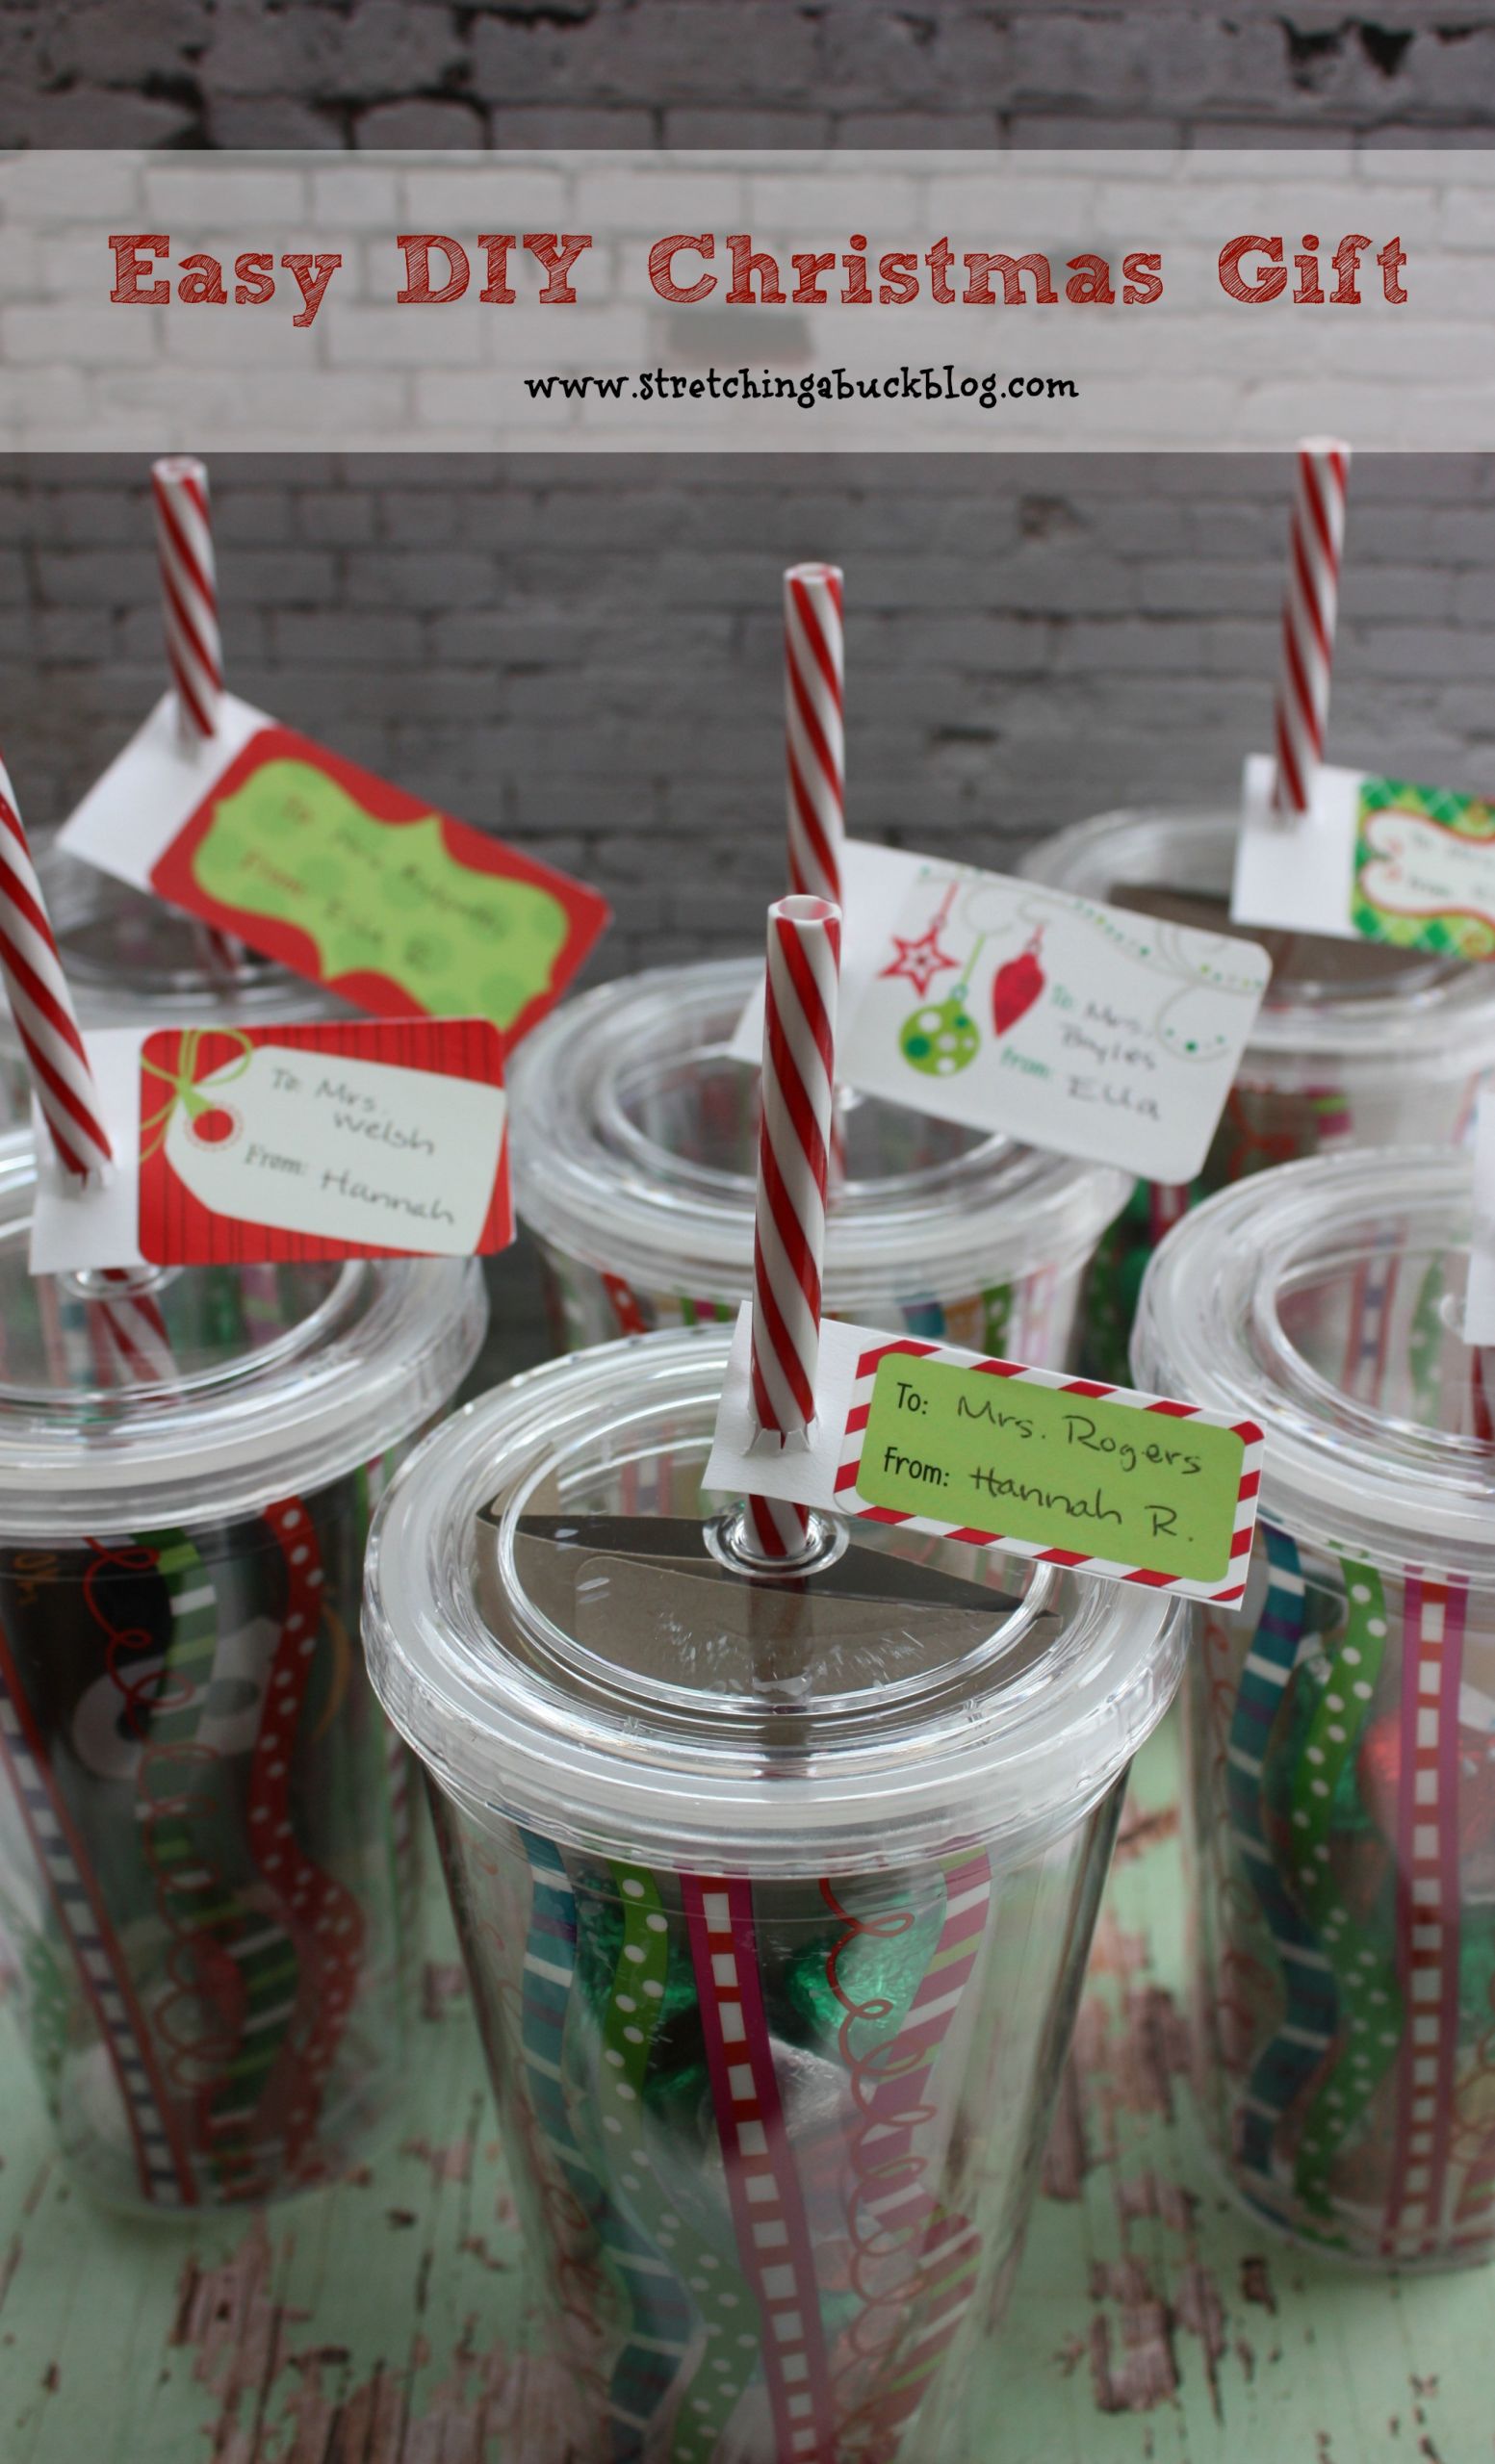 Homemade Holiday Gift Ideas
 Easy DIY Christmas Gift Idea for Teachers Friends More